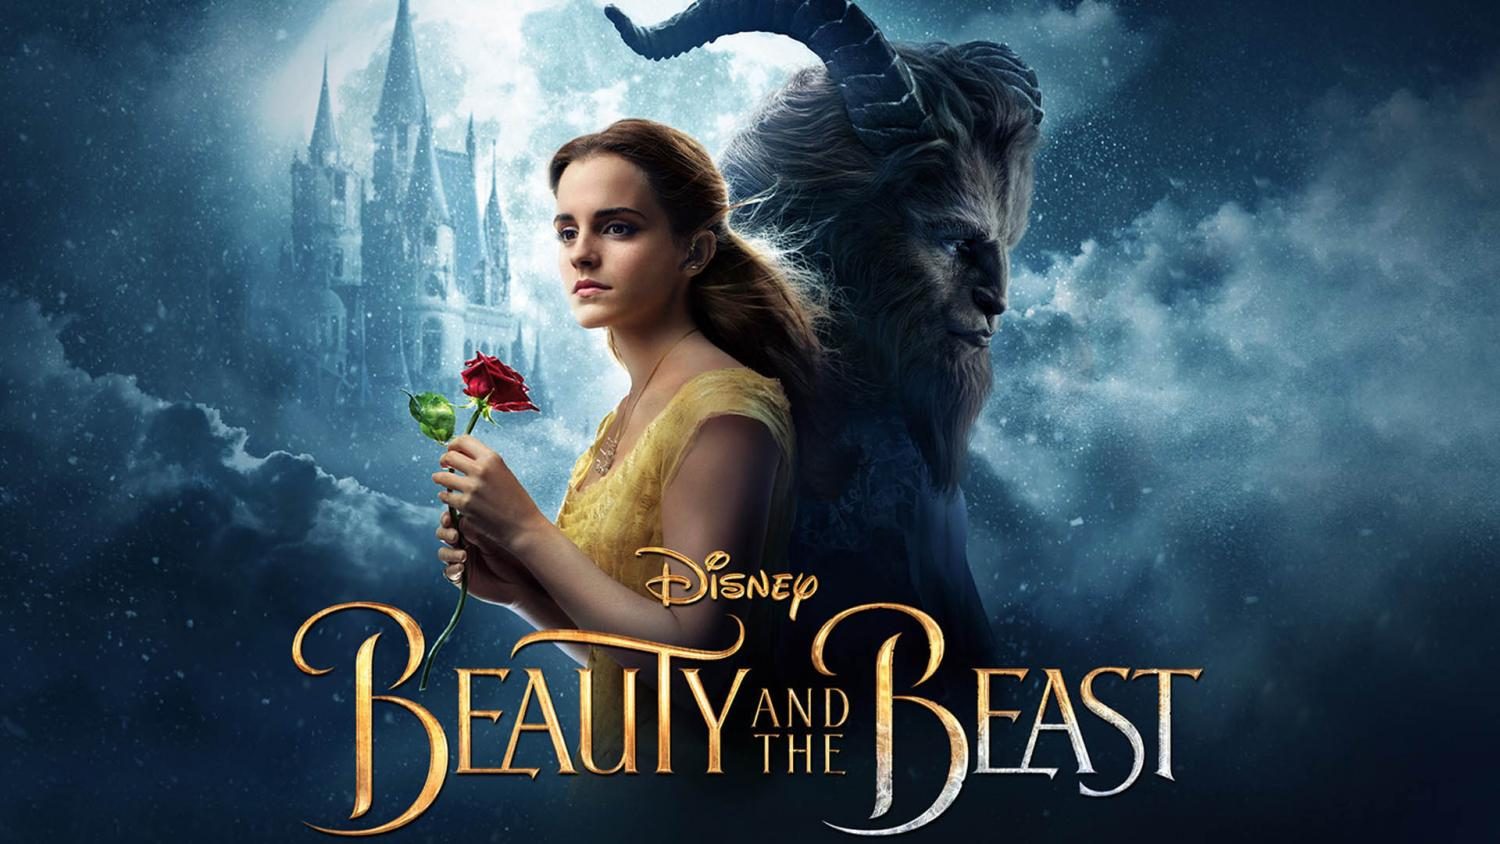 Movie Review: Beauty and the Beast